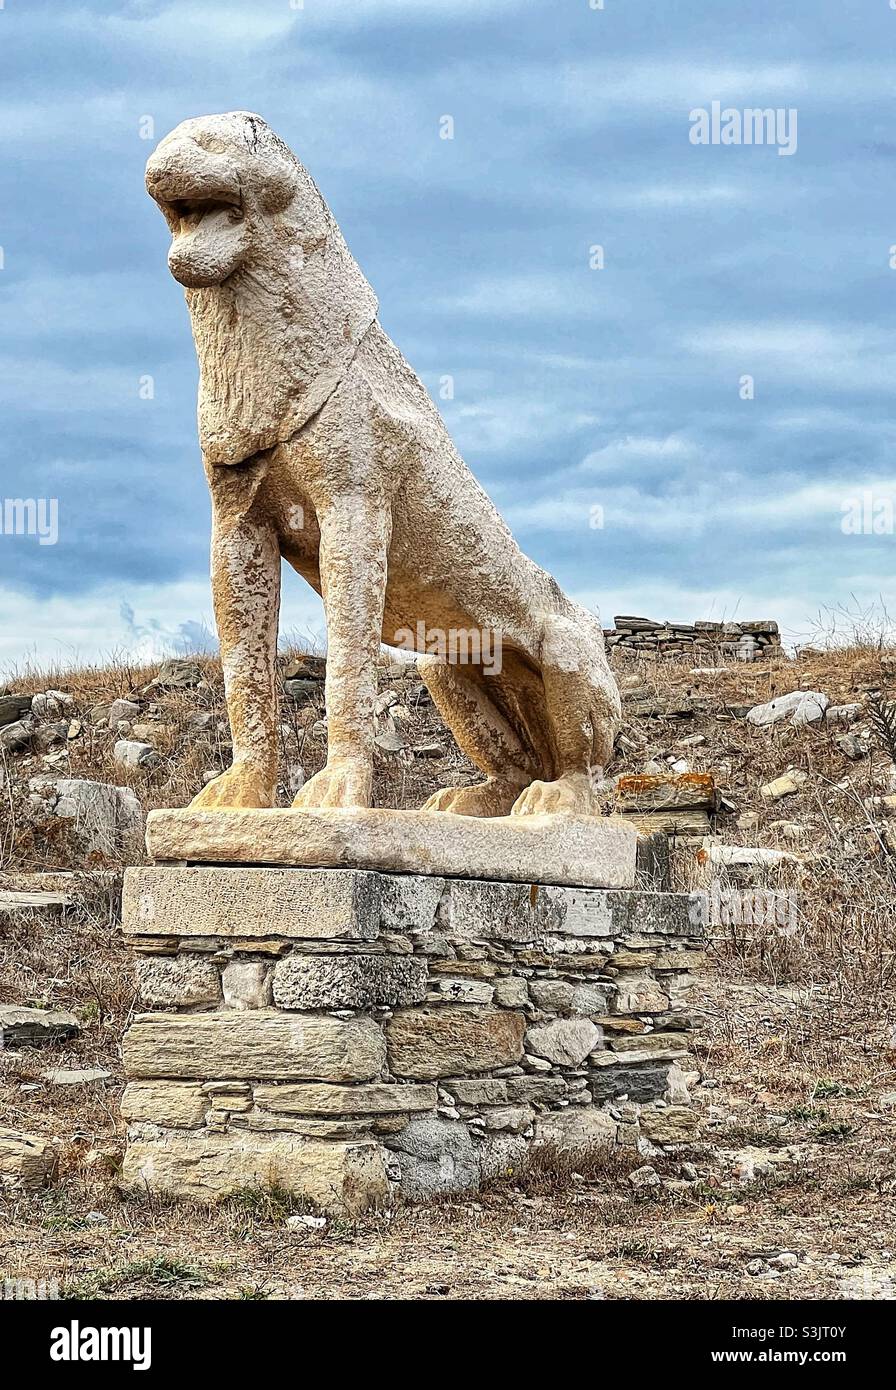 Lion Statue which is part of The terrace Of Lions on Delos Island in Greece Stock Photo